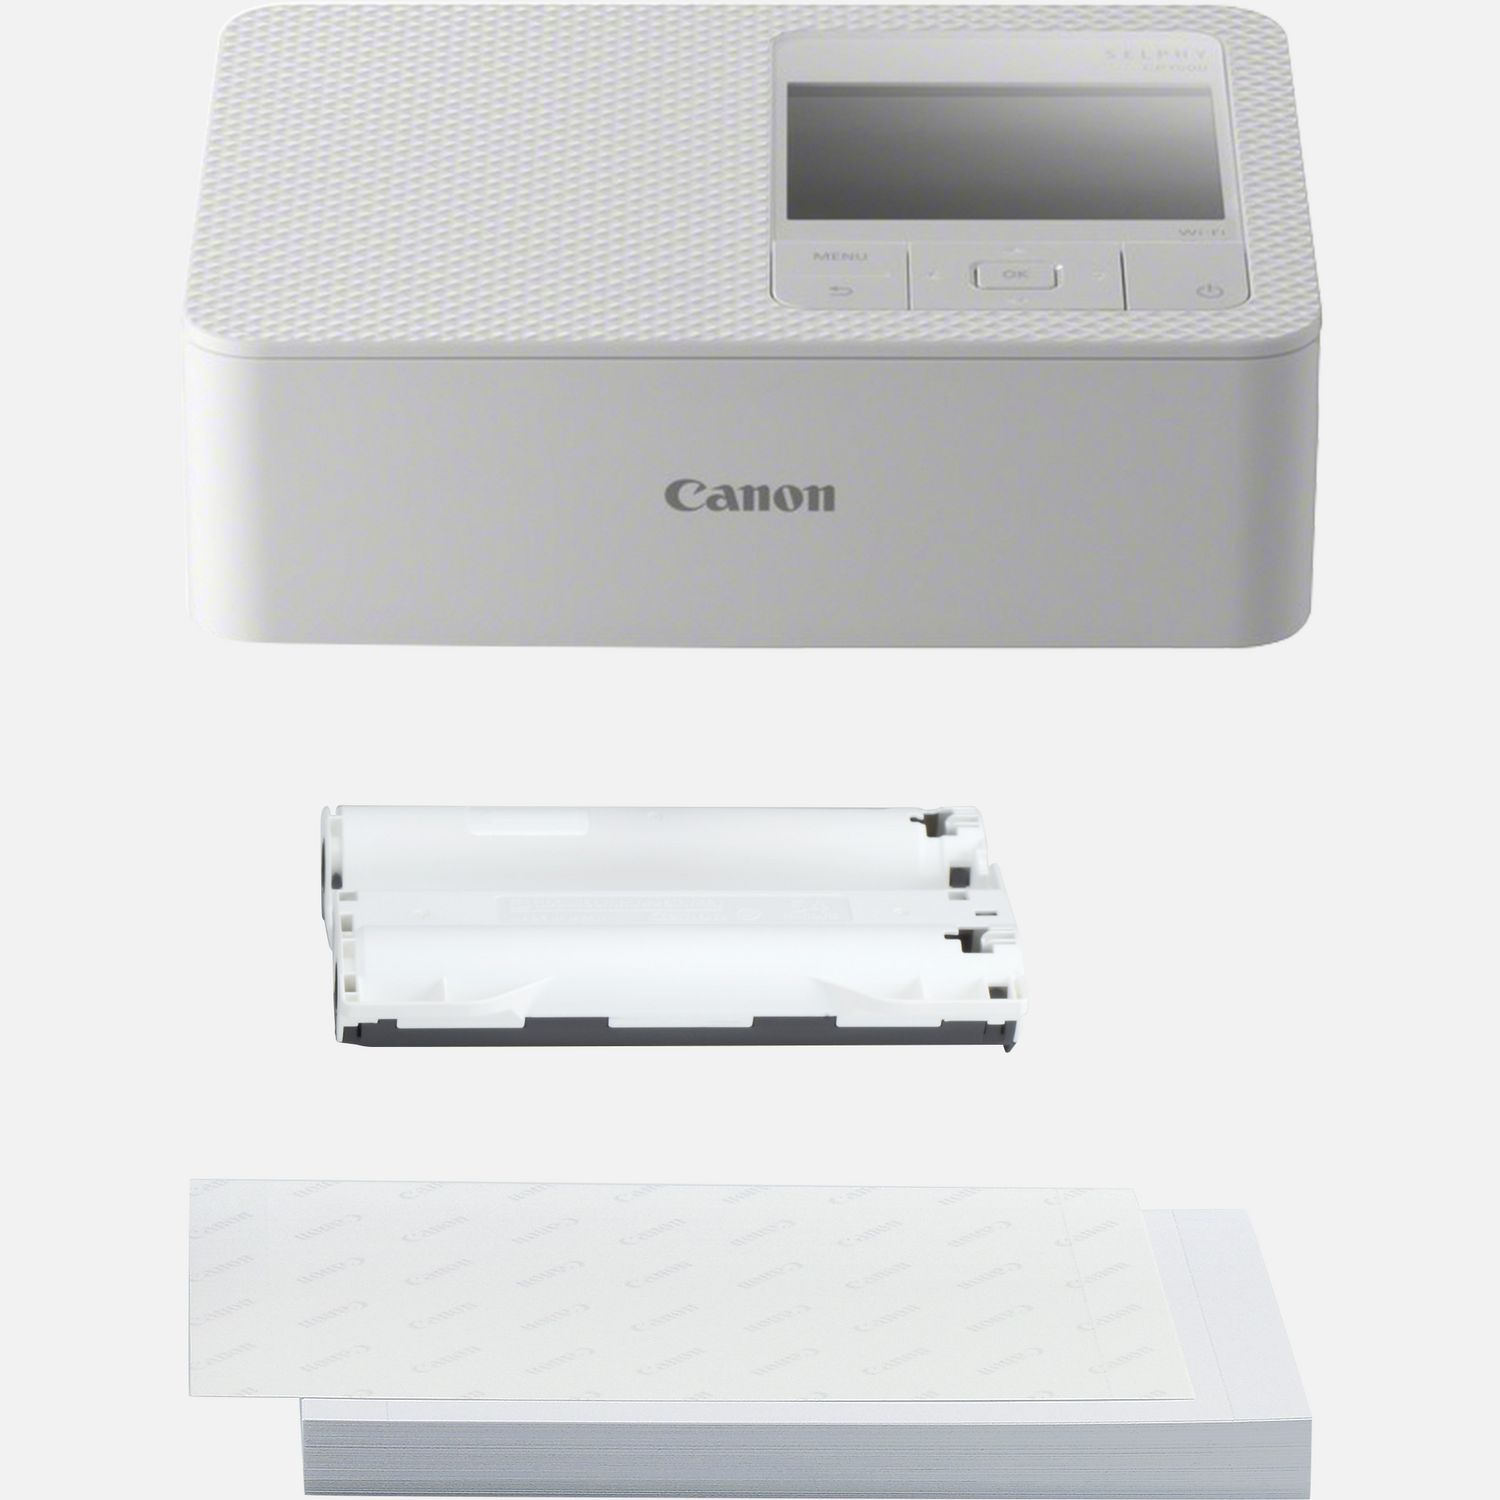 Paper + ink Canon SEPHY CP1300/CP1500